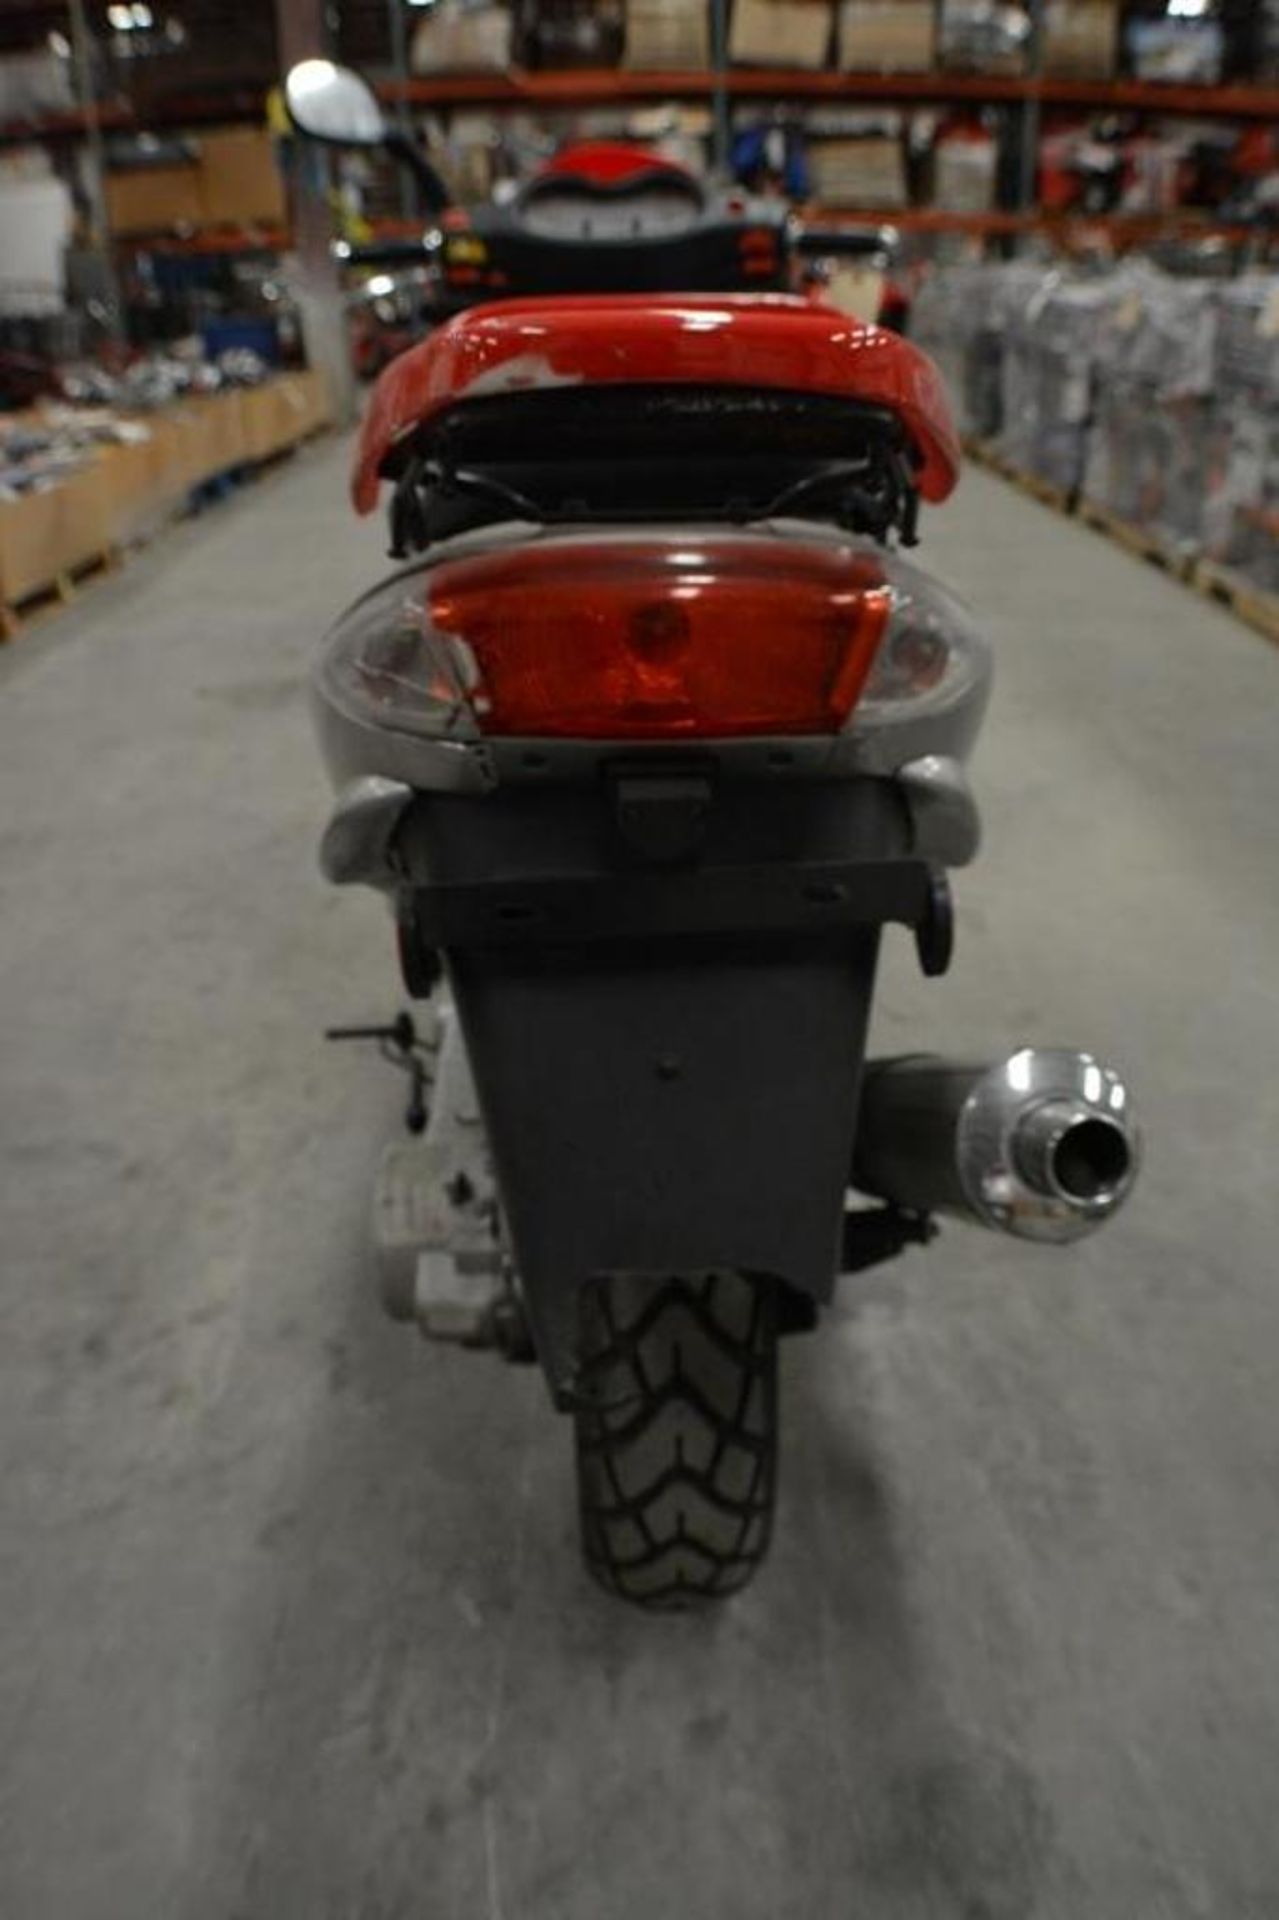 Electric Scooter 50cc Red/Black Color. This unit is for EXPORT ONLY. Buyers acknowledges is for expo - Image 6 of 8